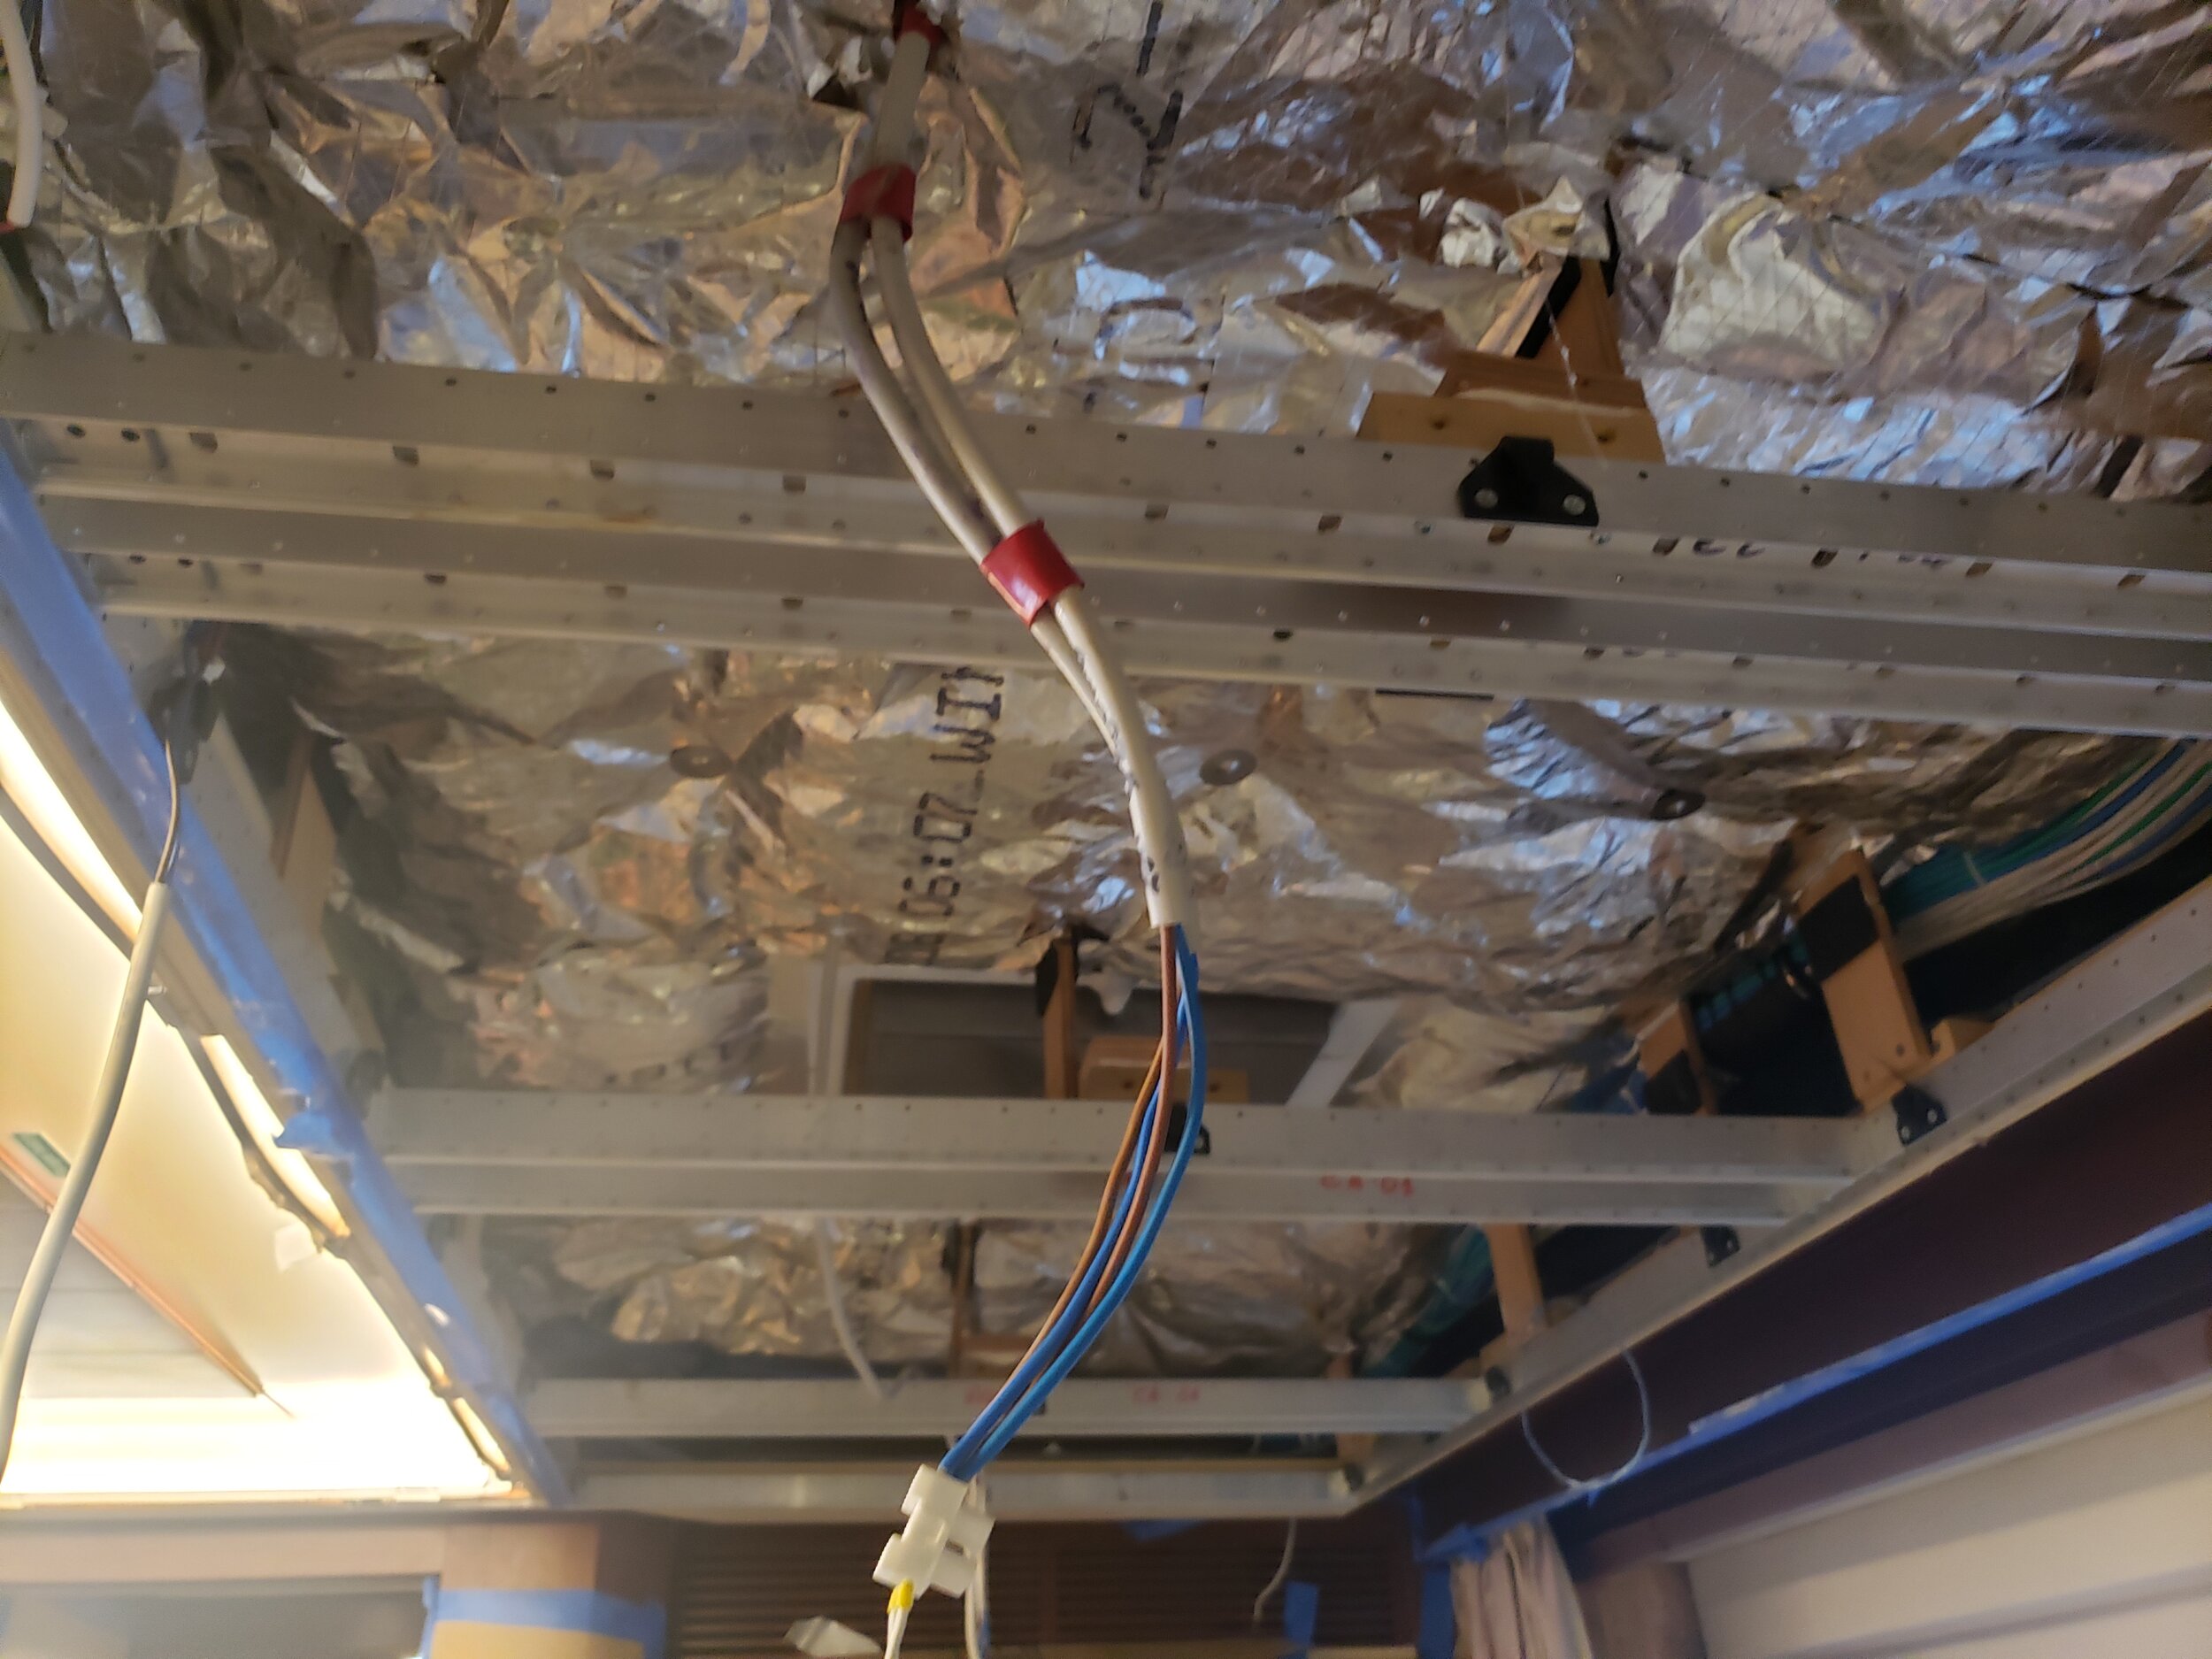  New Marine Grade Micro-lite Thermal Insulation Added To The Overhead In The Main Salon 